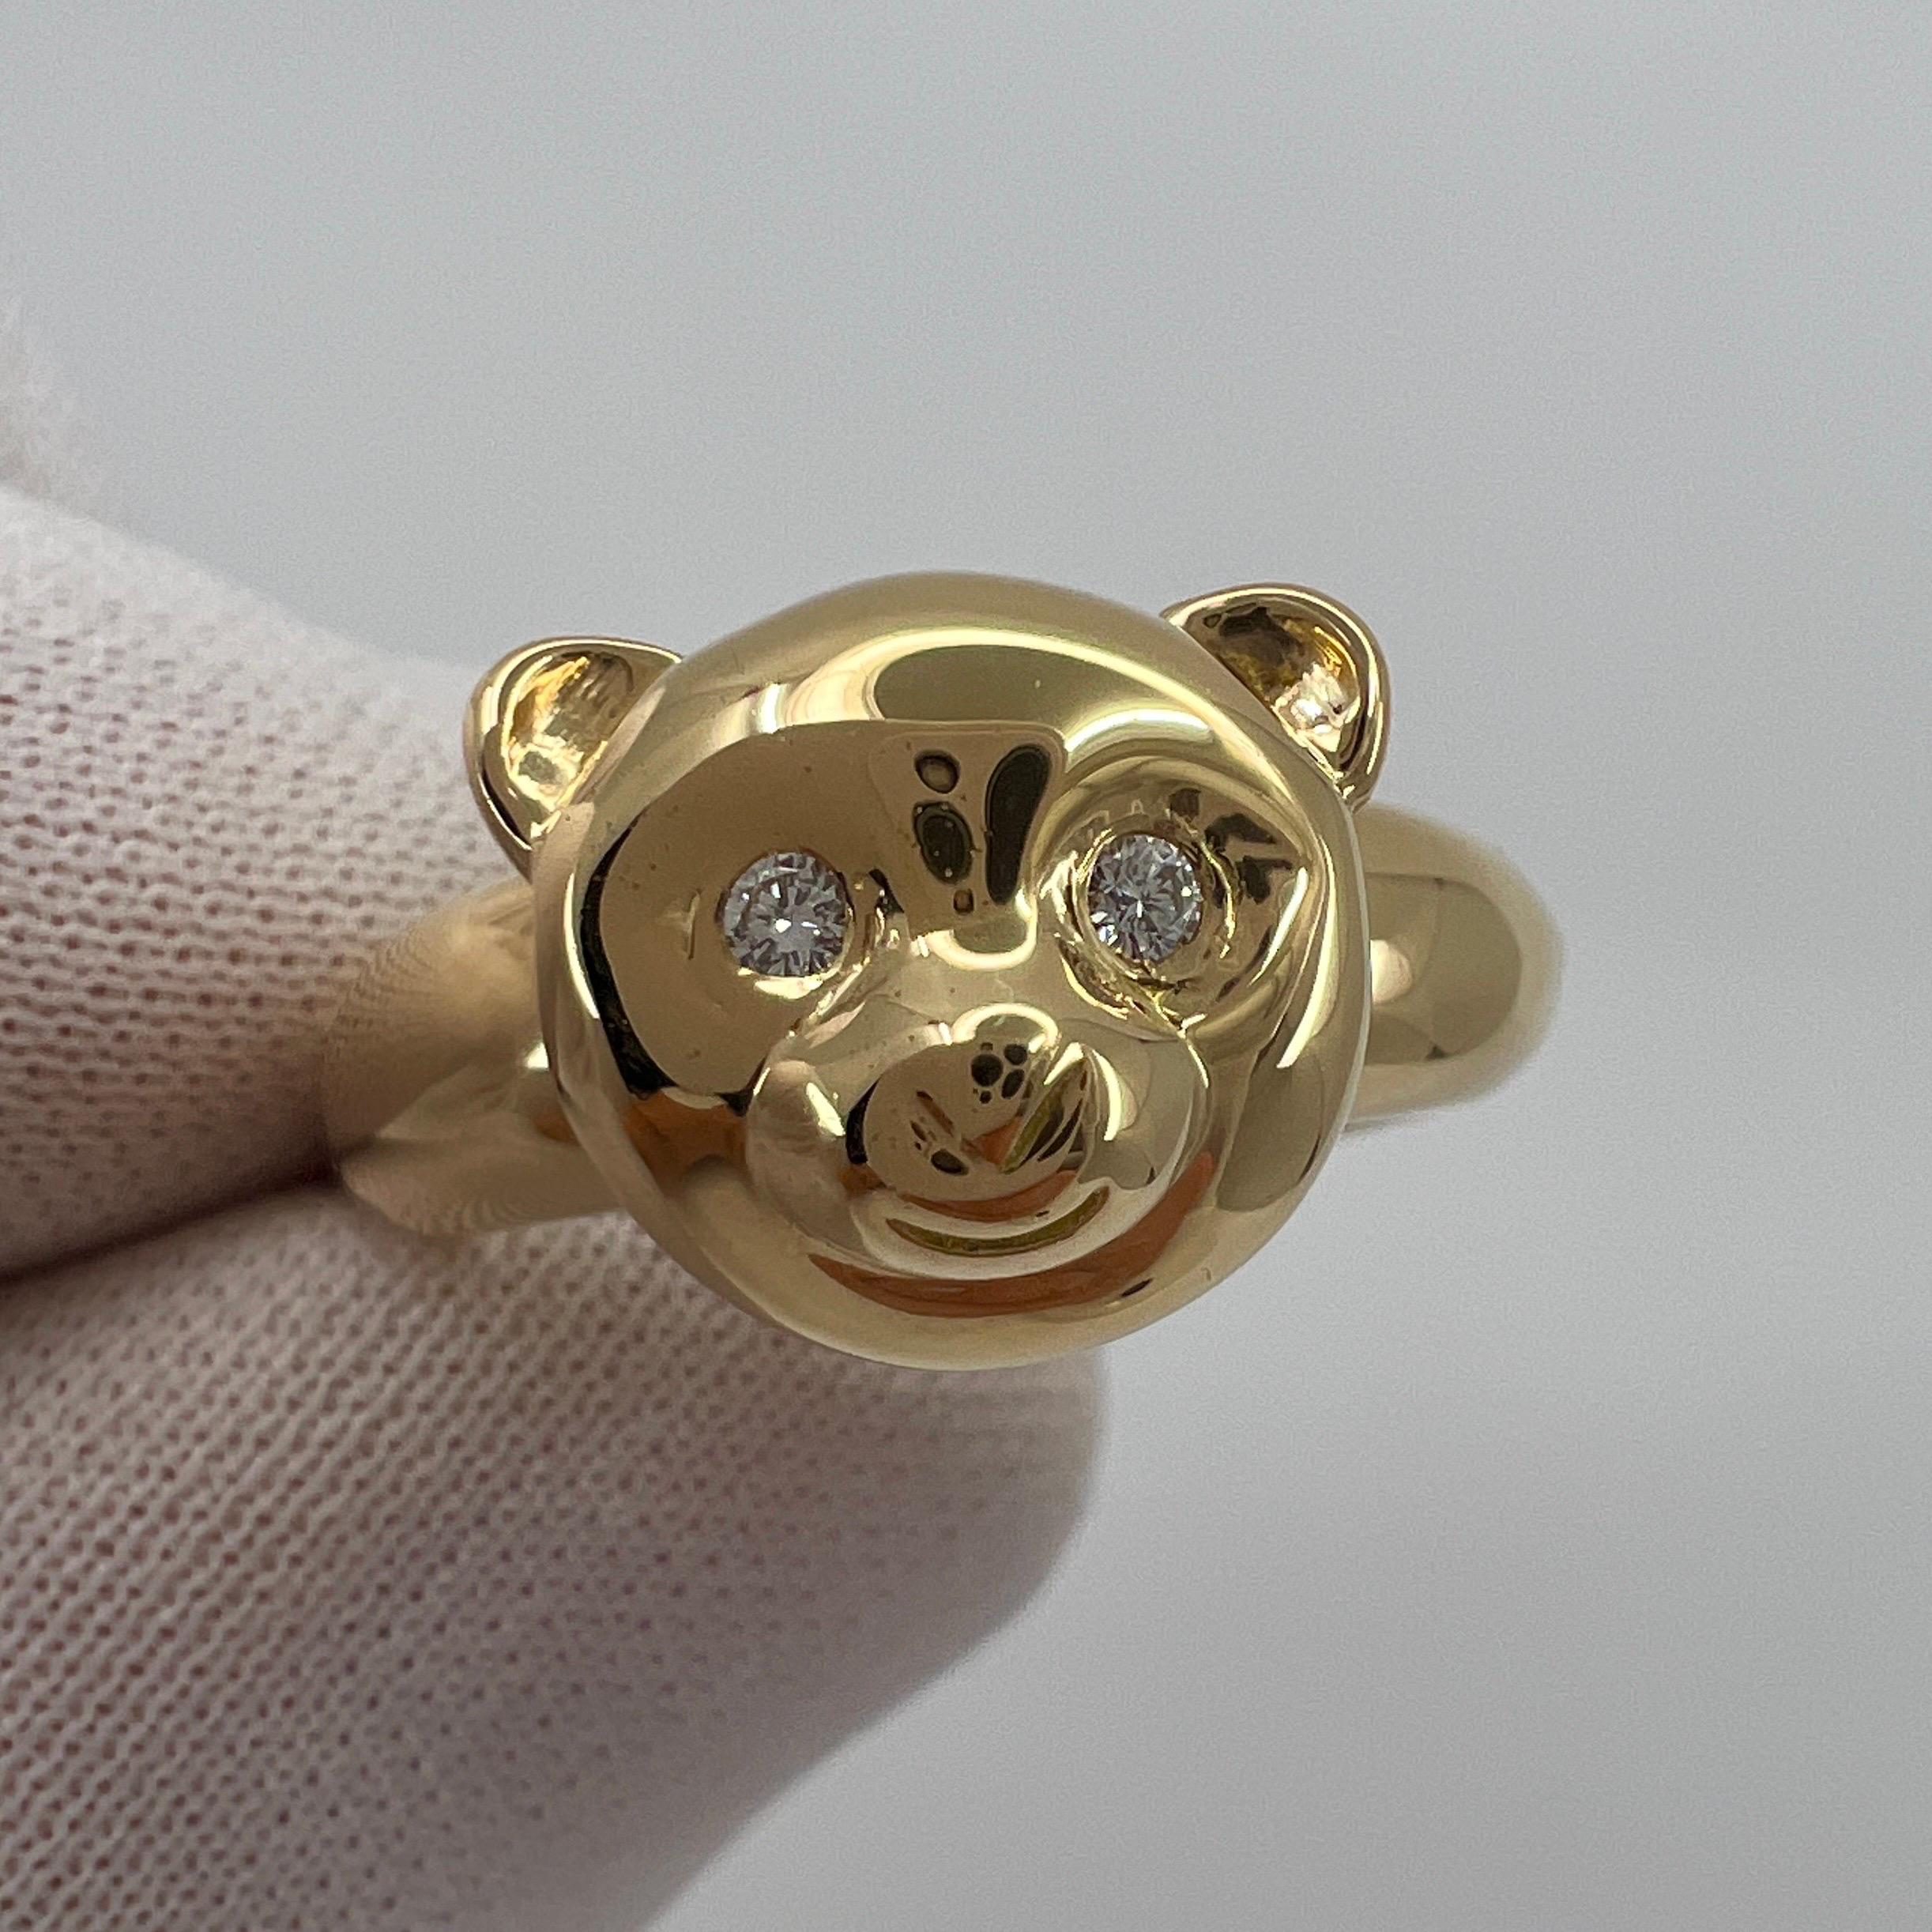 Very Rare Vintage Van Cleef & Arpels 18k Yellow Gold Teddy Bear Ring and Pendant 4